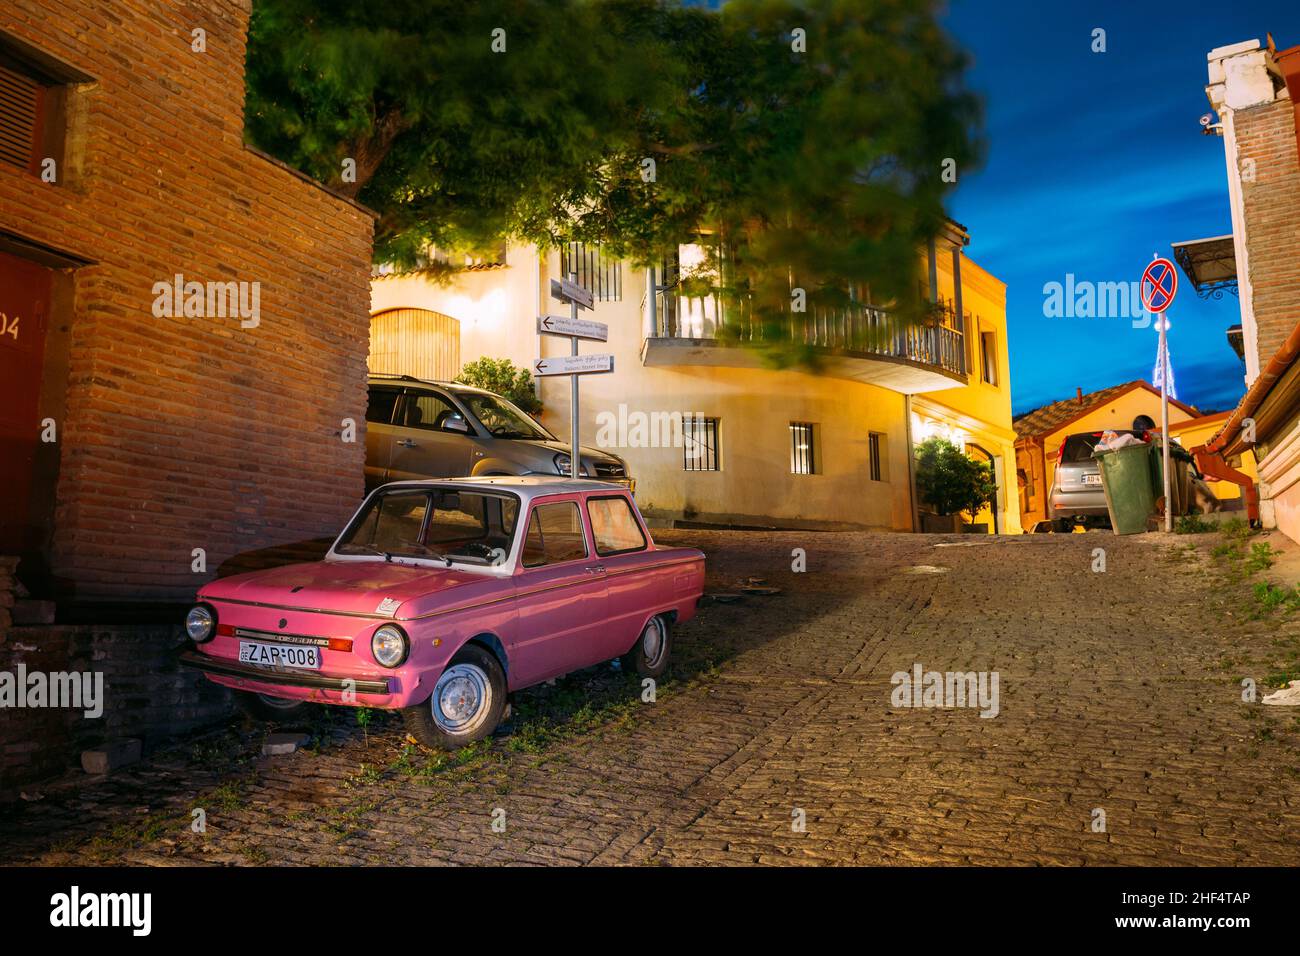 Parked Rarity Tuning Pink Minicar Zaporozhets On Paved Street In Old District Of Tbilisi, Georgia Stock Photo